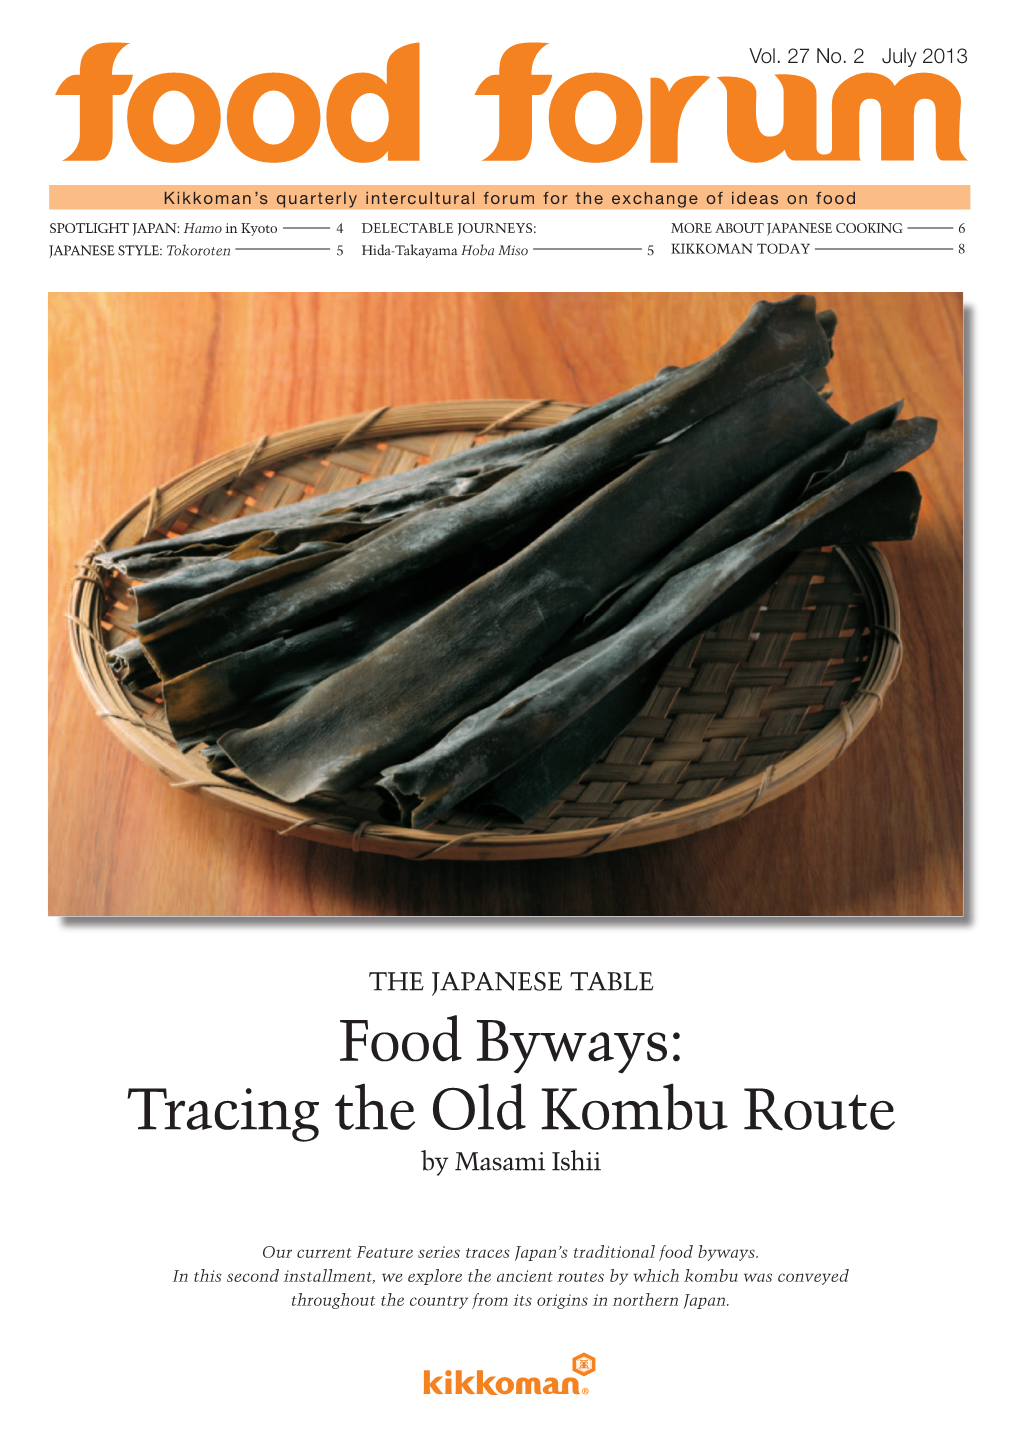 Food Byways: Tracing the Old Kombu Route by Masami Ishii